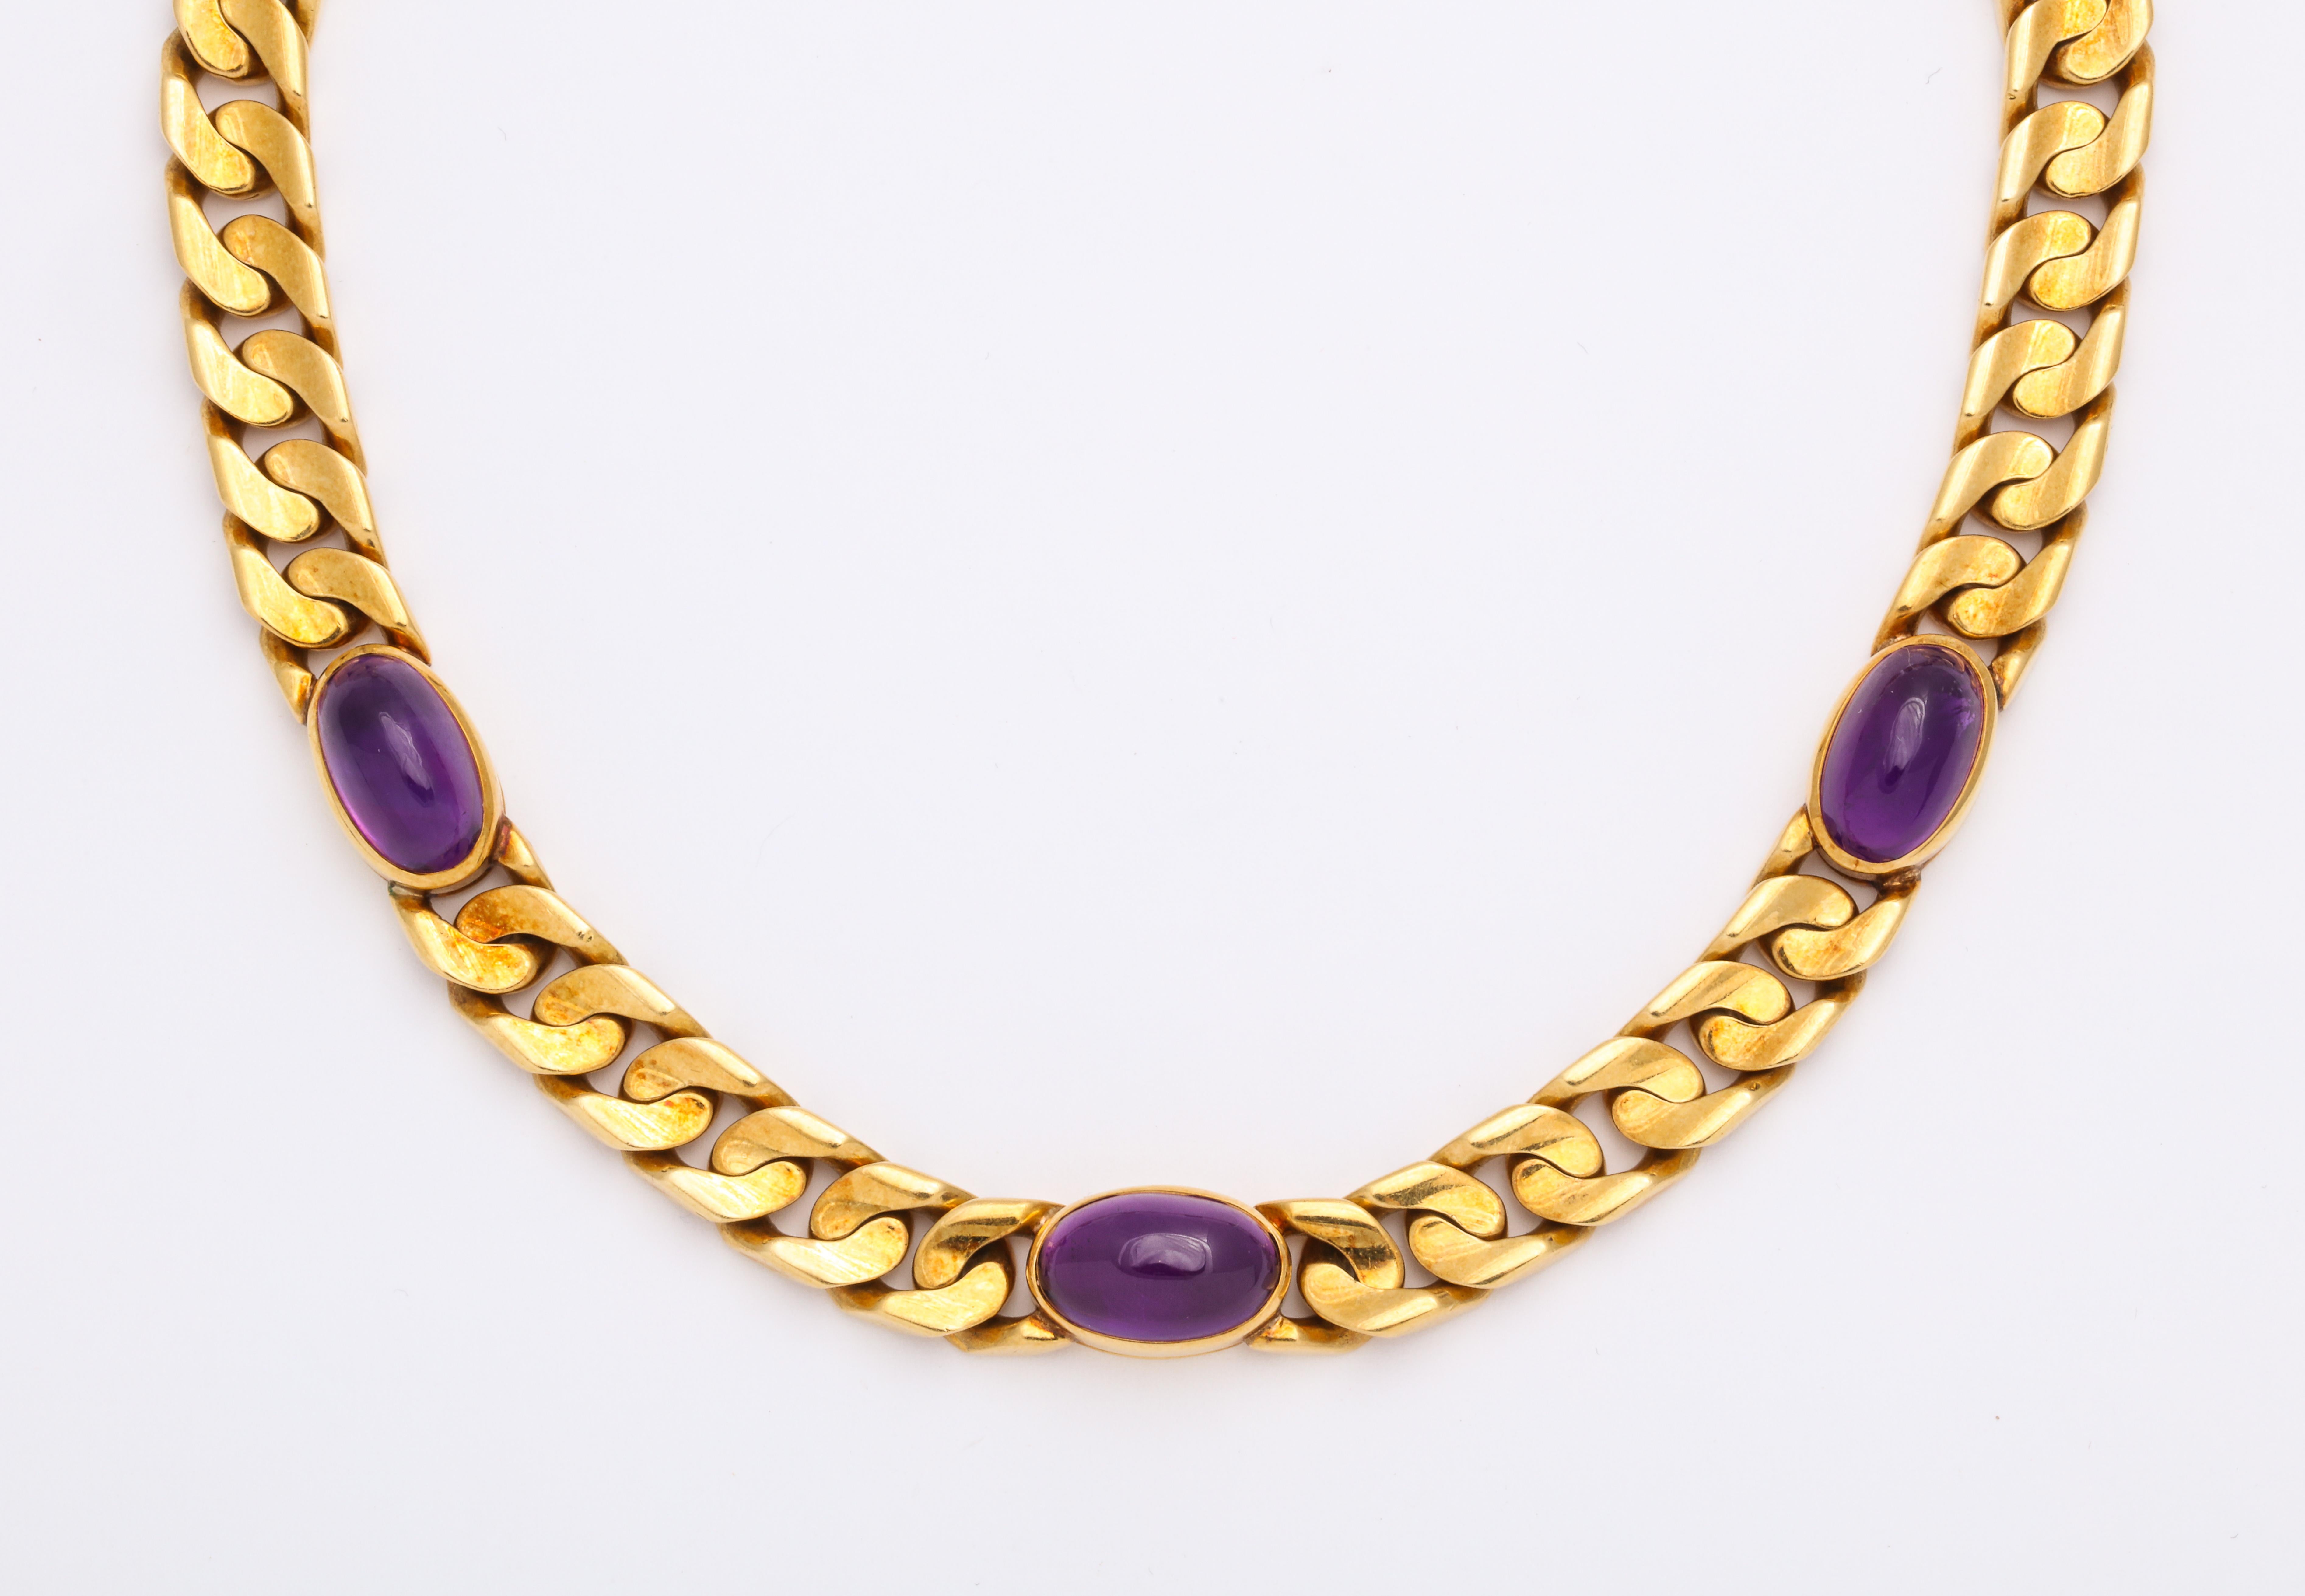 La Dolce Vita! Love Bulgari? Love Purple? This will make you smile. Our 18KYG choker is 15 3/4 inches of solid-gold Italian chicness. 7 oval cabochon amethysts are bezel-set in a classic '80s Bulgari design.